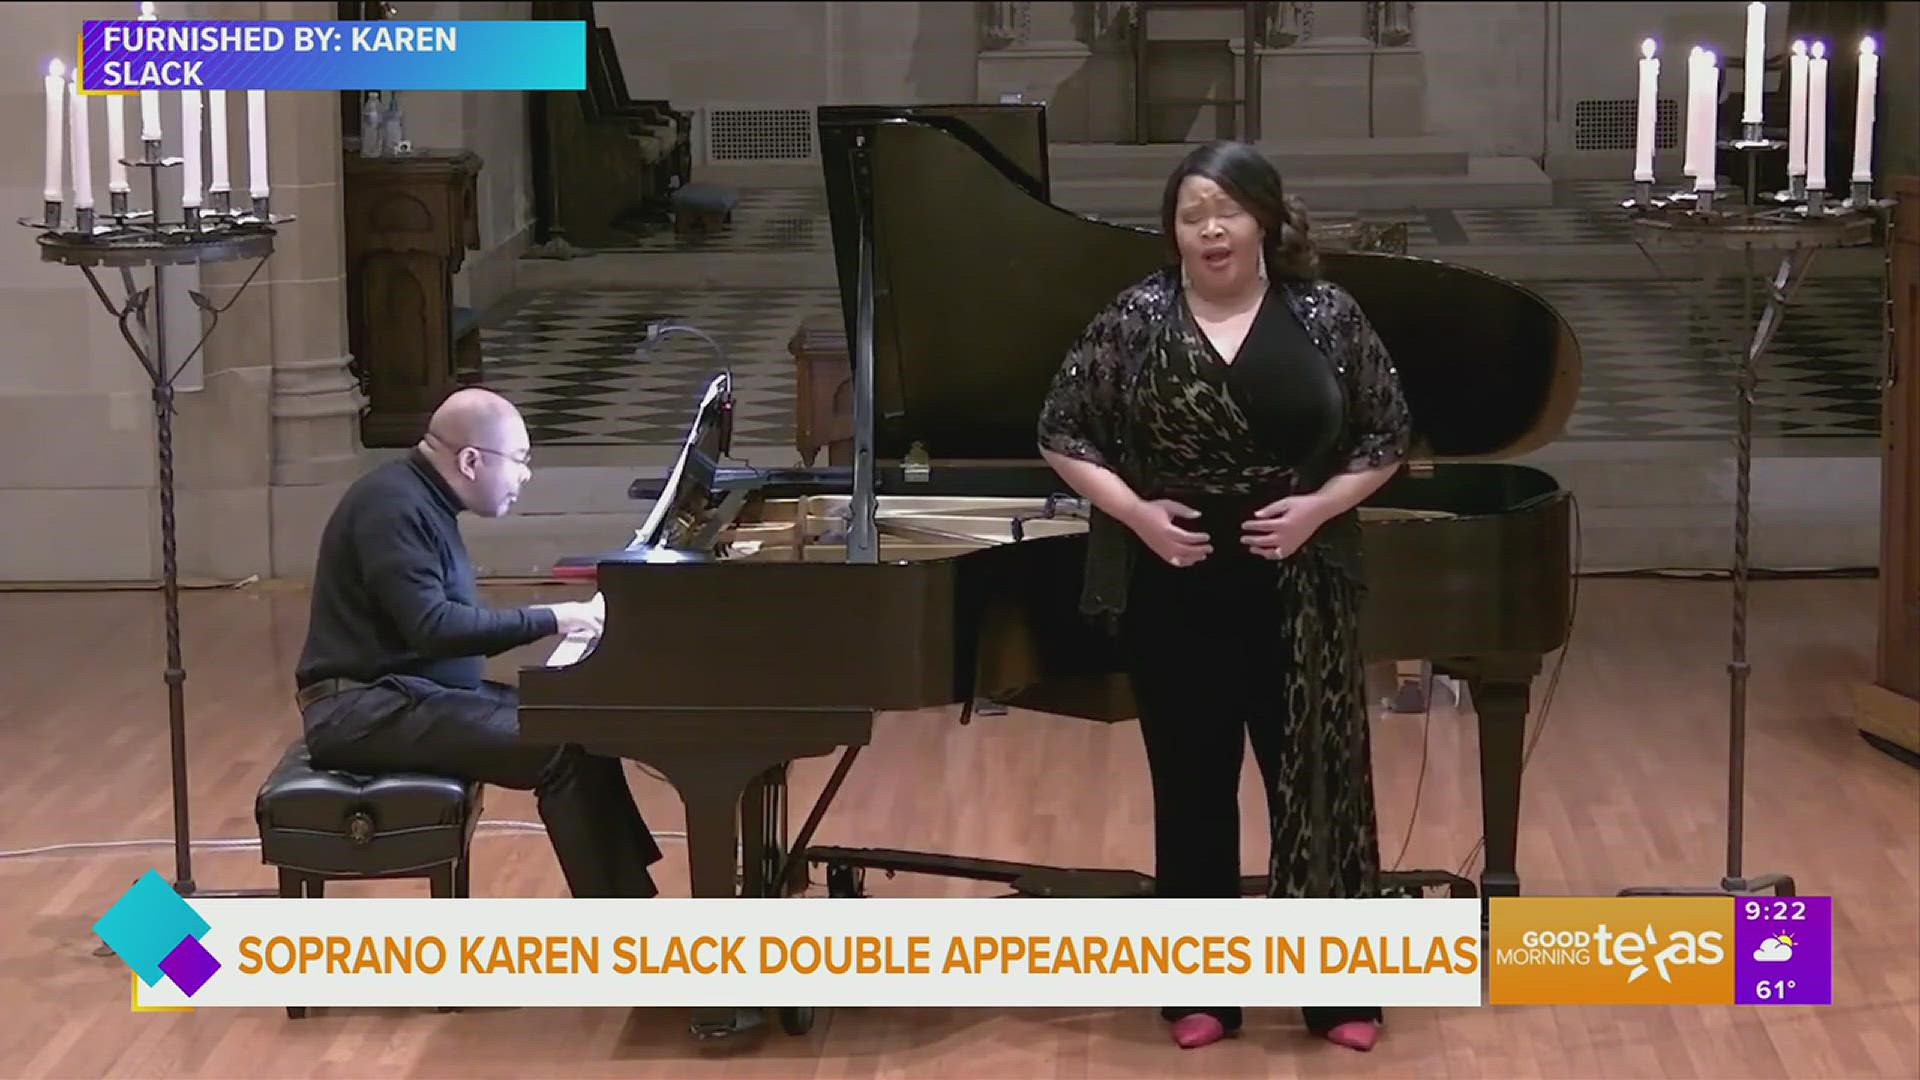 Karen Slack is on stage in Dallas this week in two highly anticipated performances, one night at the Dallas Symphony Orchestra, and then at the Dallas Opera.